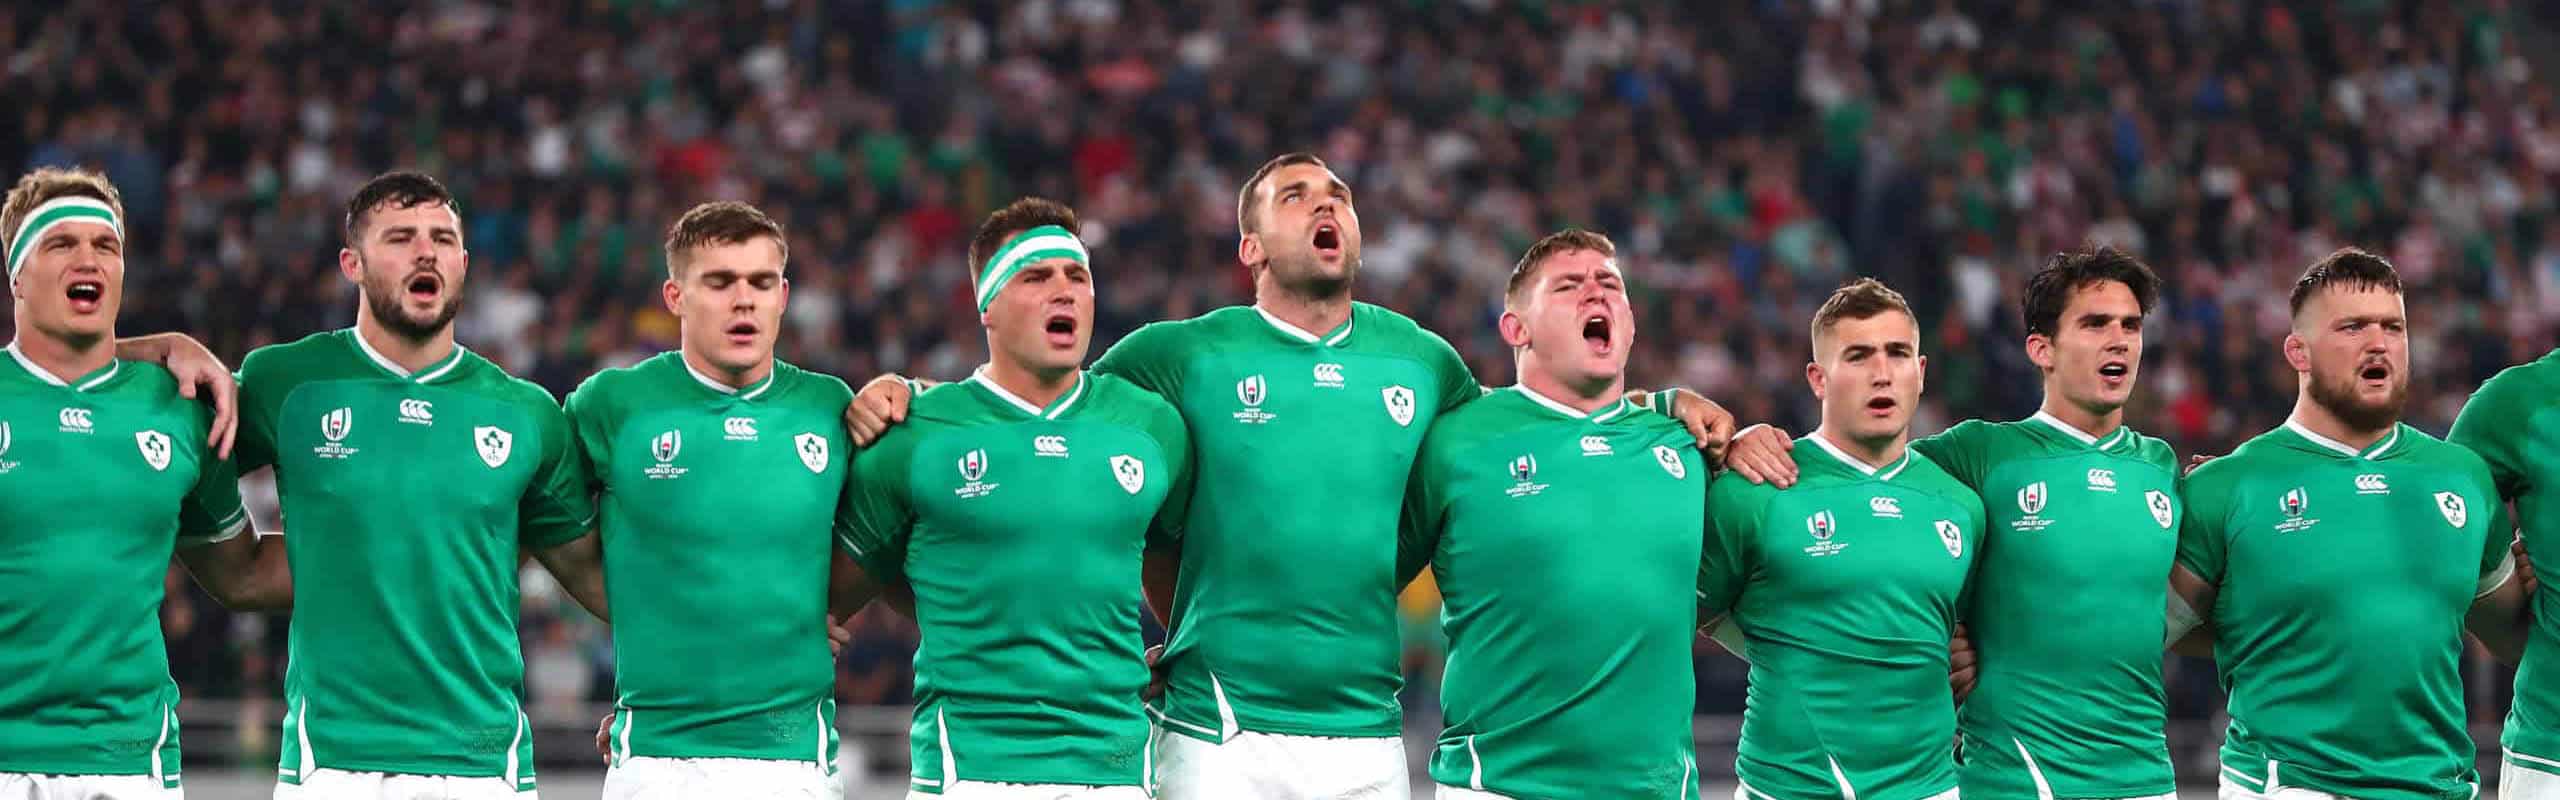 Ireland national team sing the national anthem during the Rugby World Cup